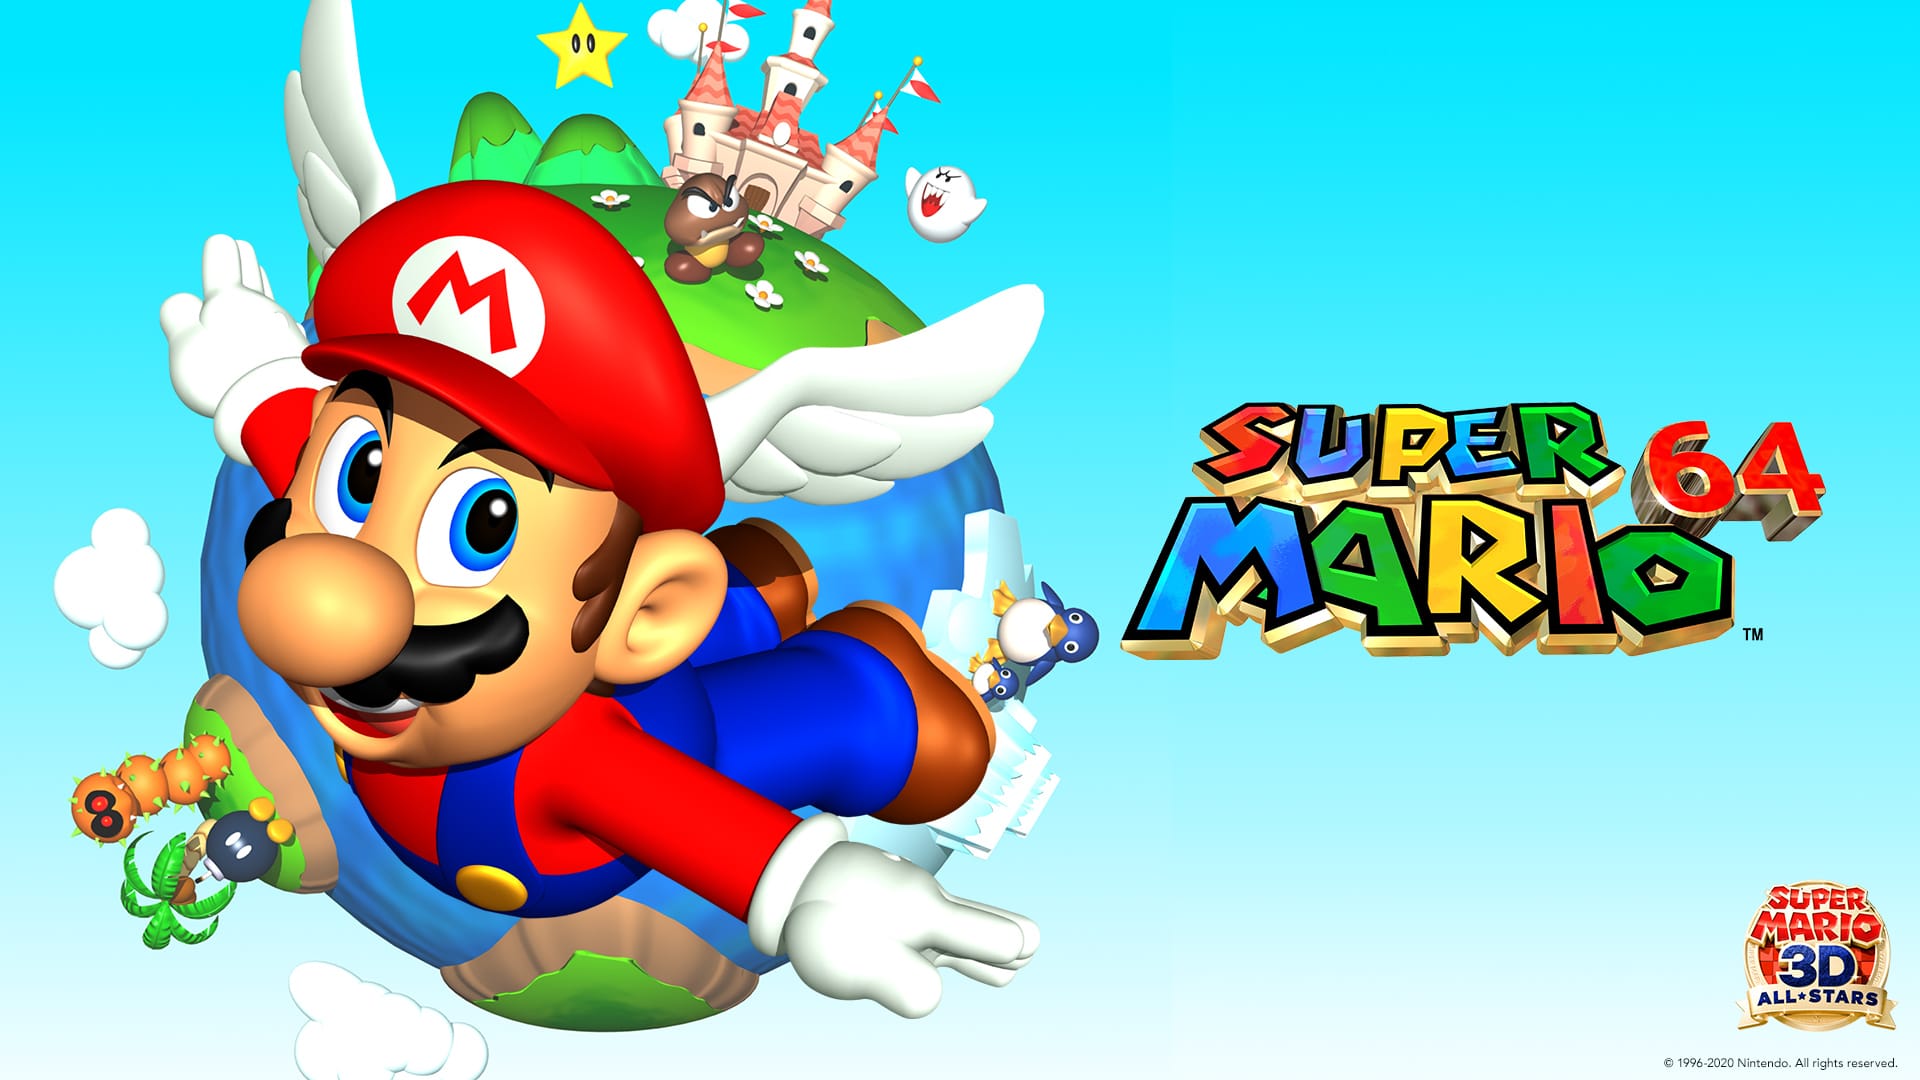 The Official Super Mario 3D All Stars Website Includes High Resolution Desktop Wallpaper For Each Game